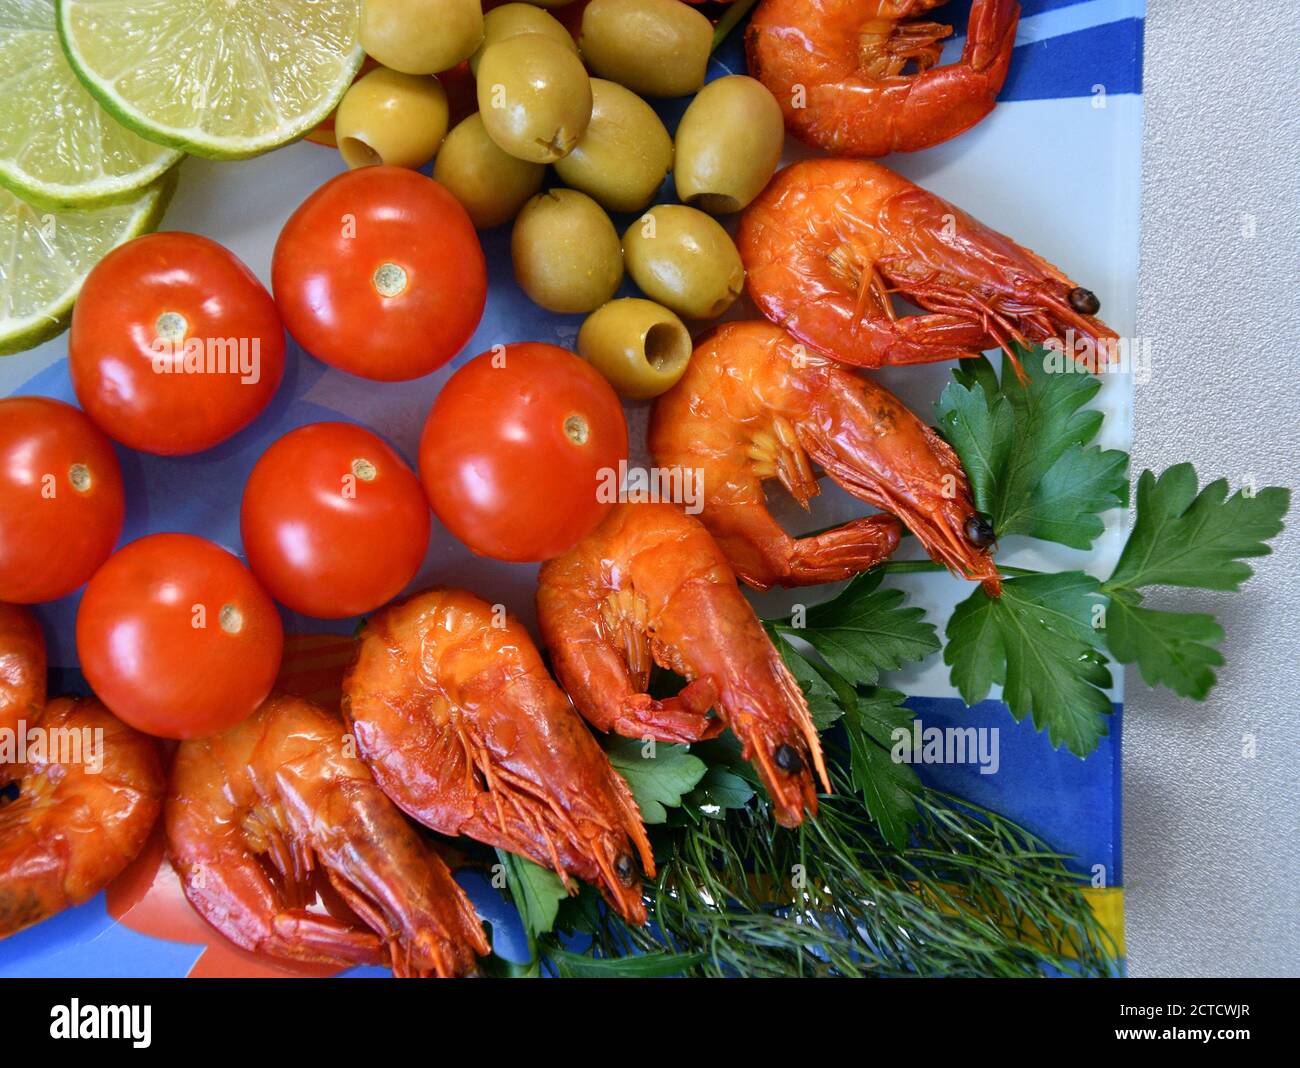 Cooked shrimp with fresh herbs, olives, lime and tomatoes Stock Photo